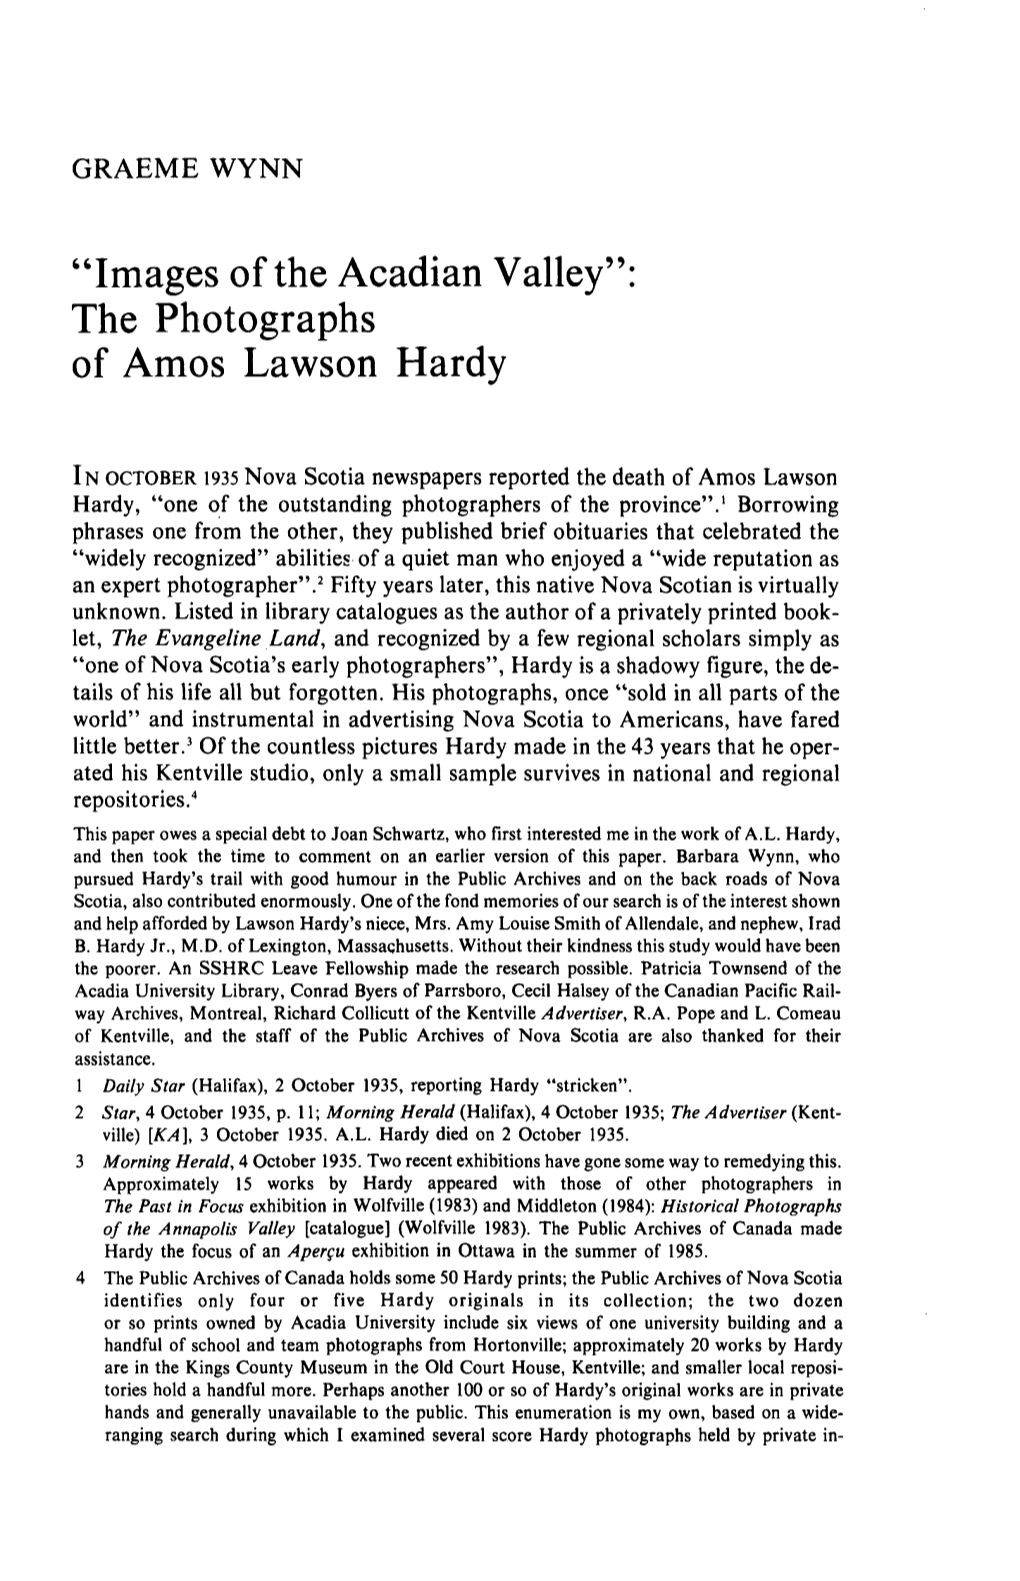 "Images of the Acadian Valley": the Photographs of Amos Lawson Hardy